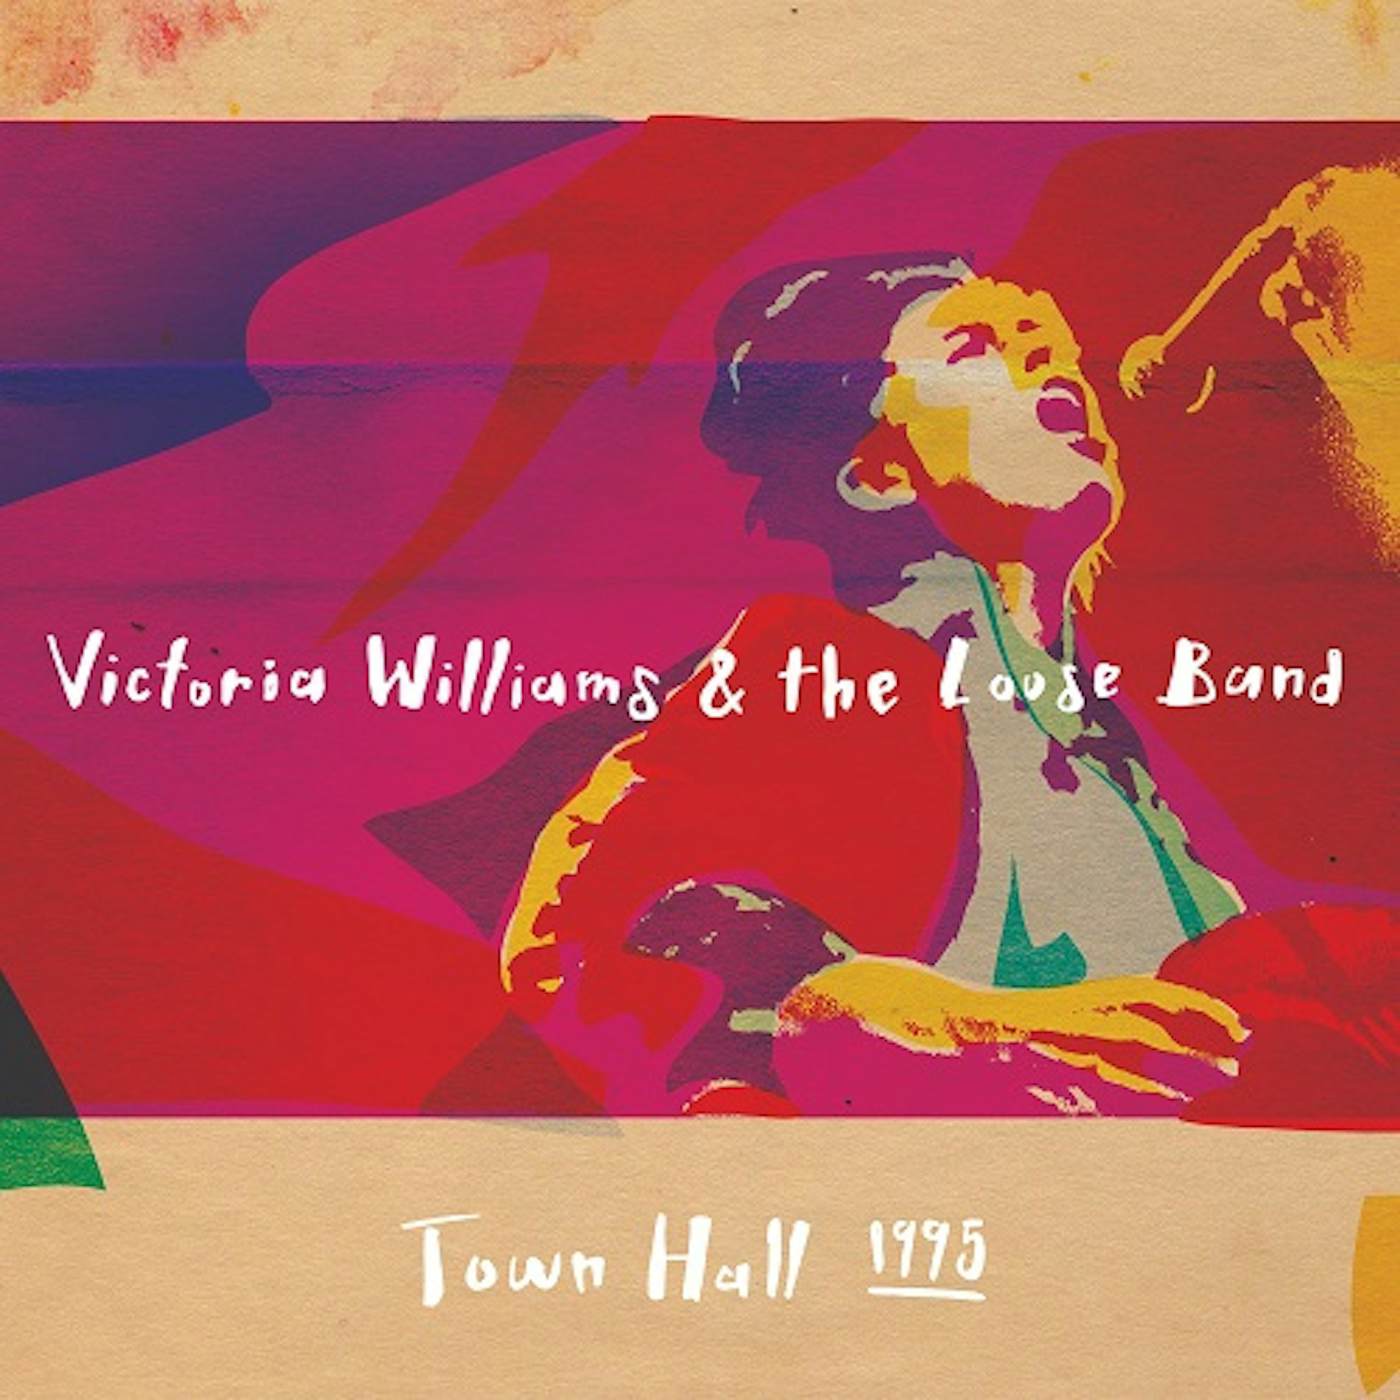 VICTORIA WILLIAMS & THE LOOSE BAND TOWN HALL 1995 Vinyl Record